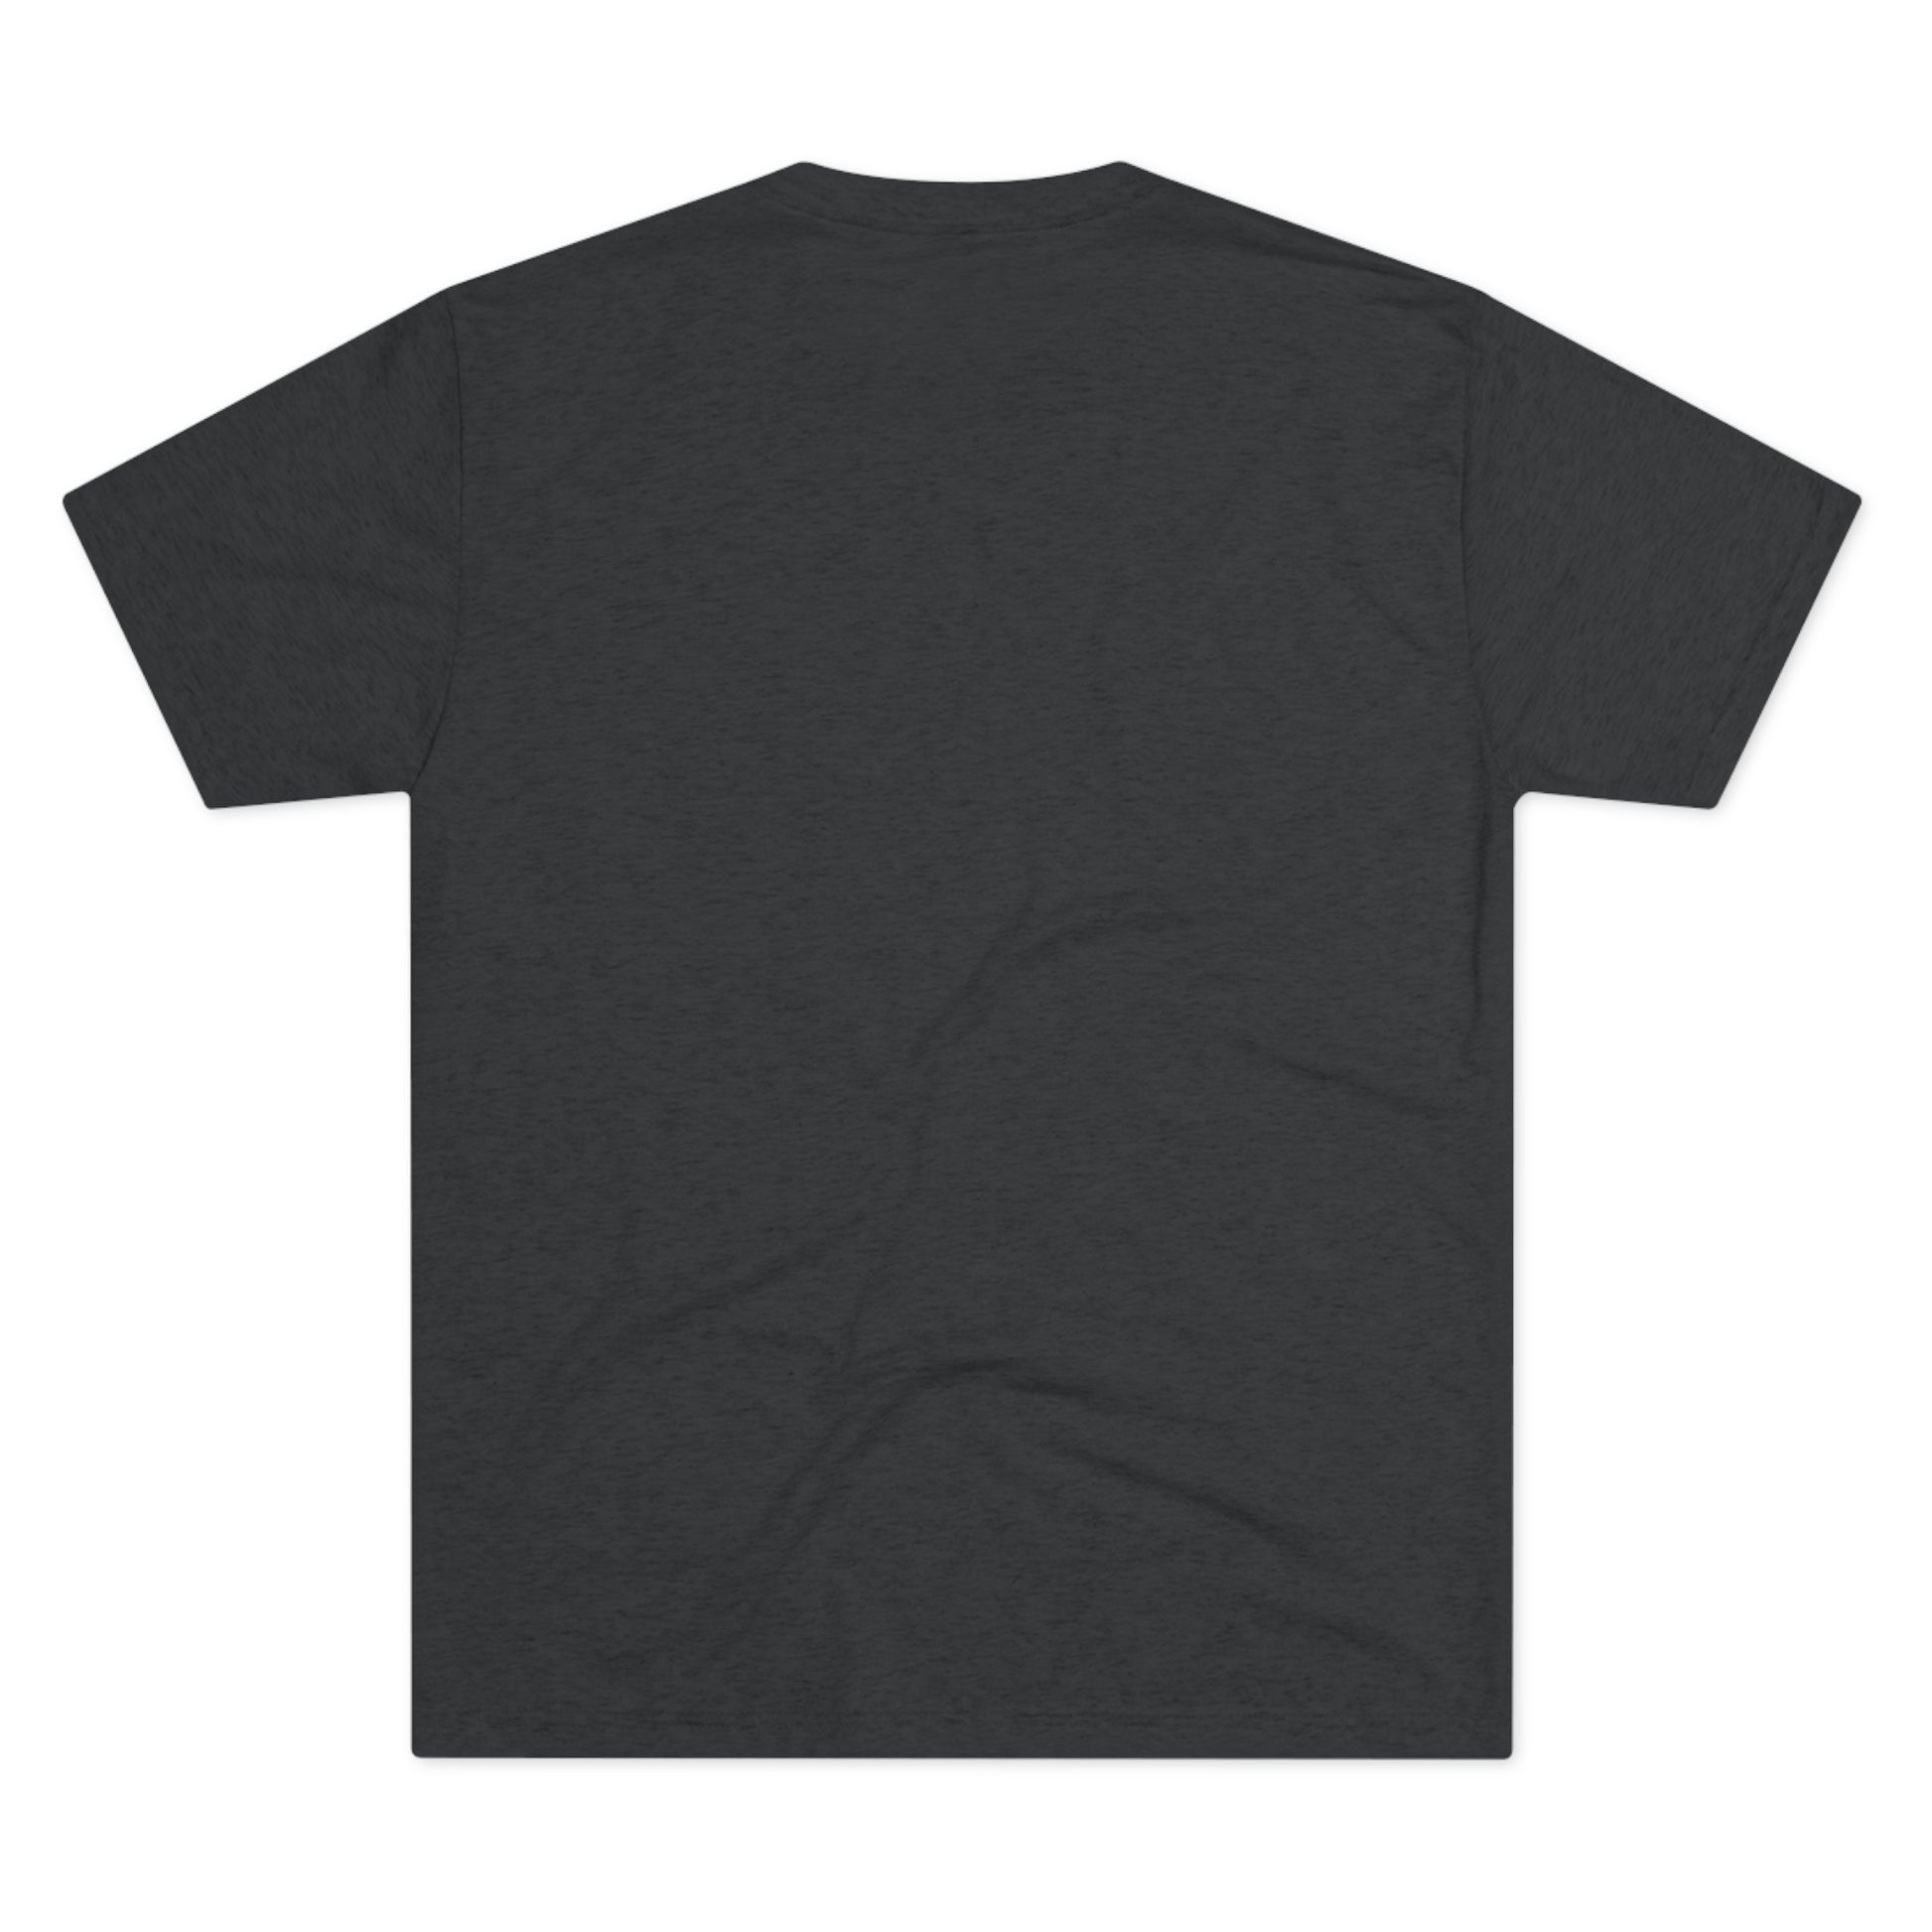 A plain dark gray Inhale Strength Exhale Doubt w Images - Unisex Tri-Blend Crew Tee by Printify displayed from the back on a flat surface with no visible designs or logos.